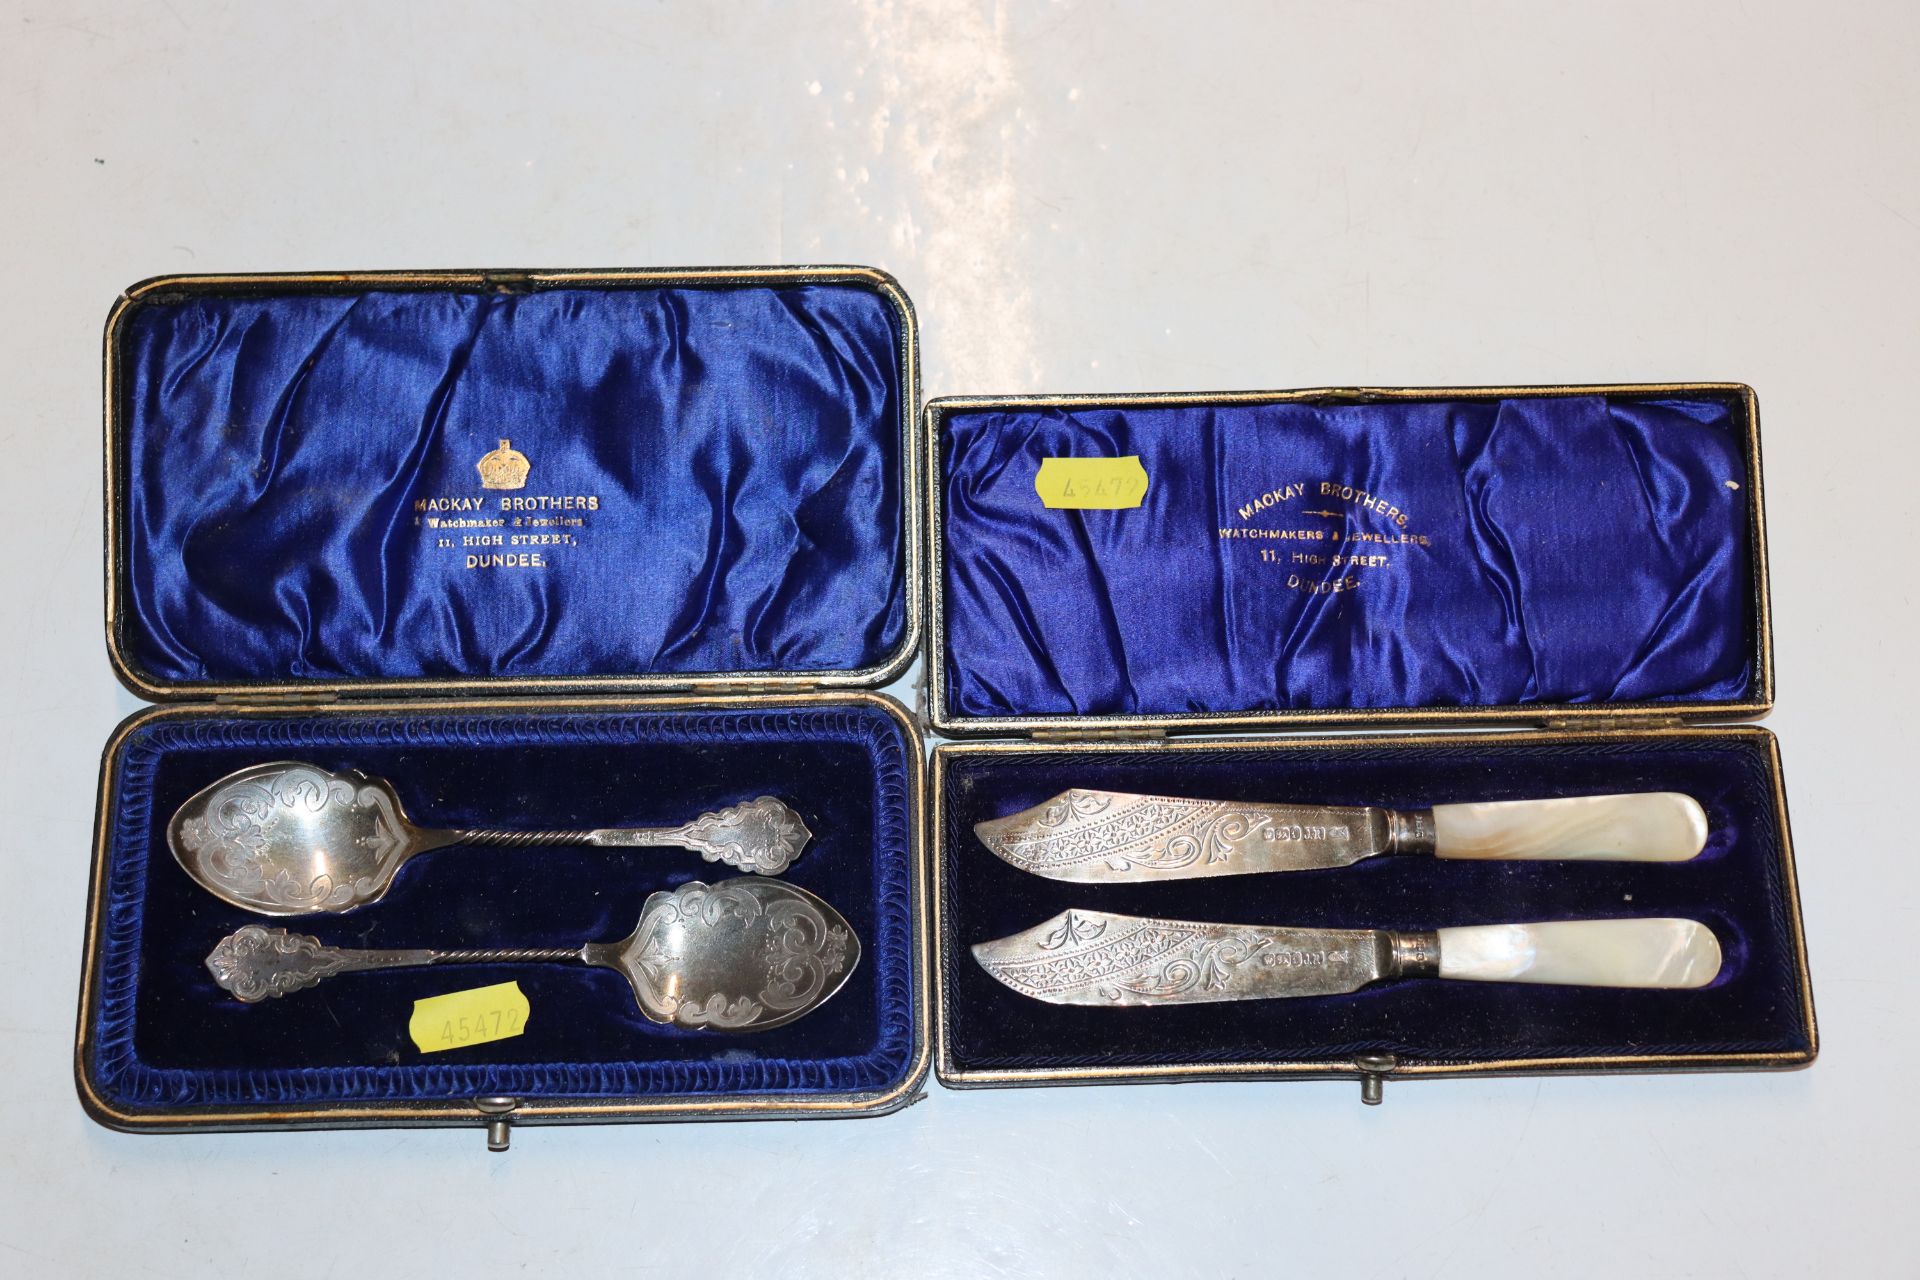 A cased pair of silver knives with mother of pearl